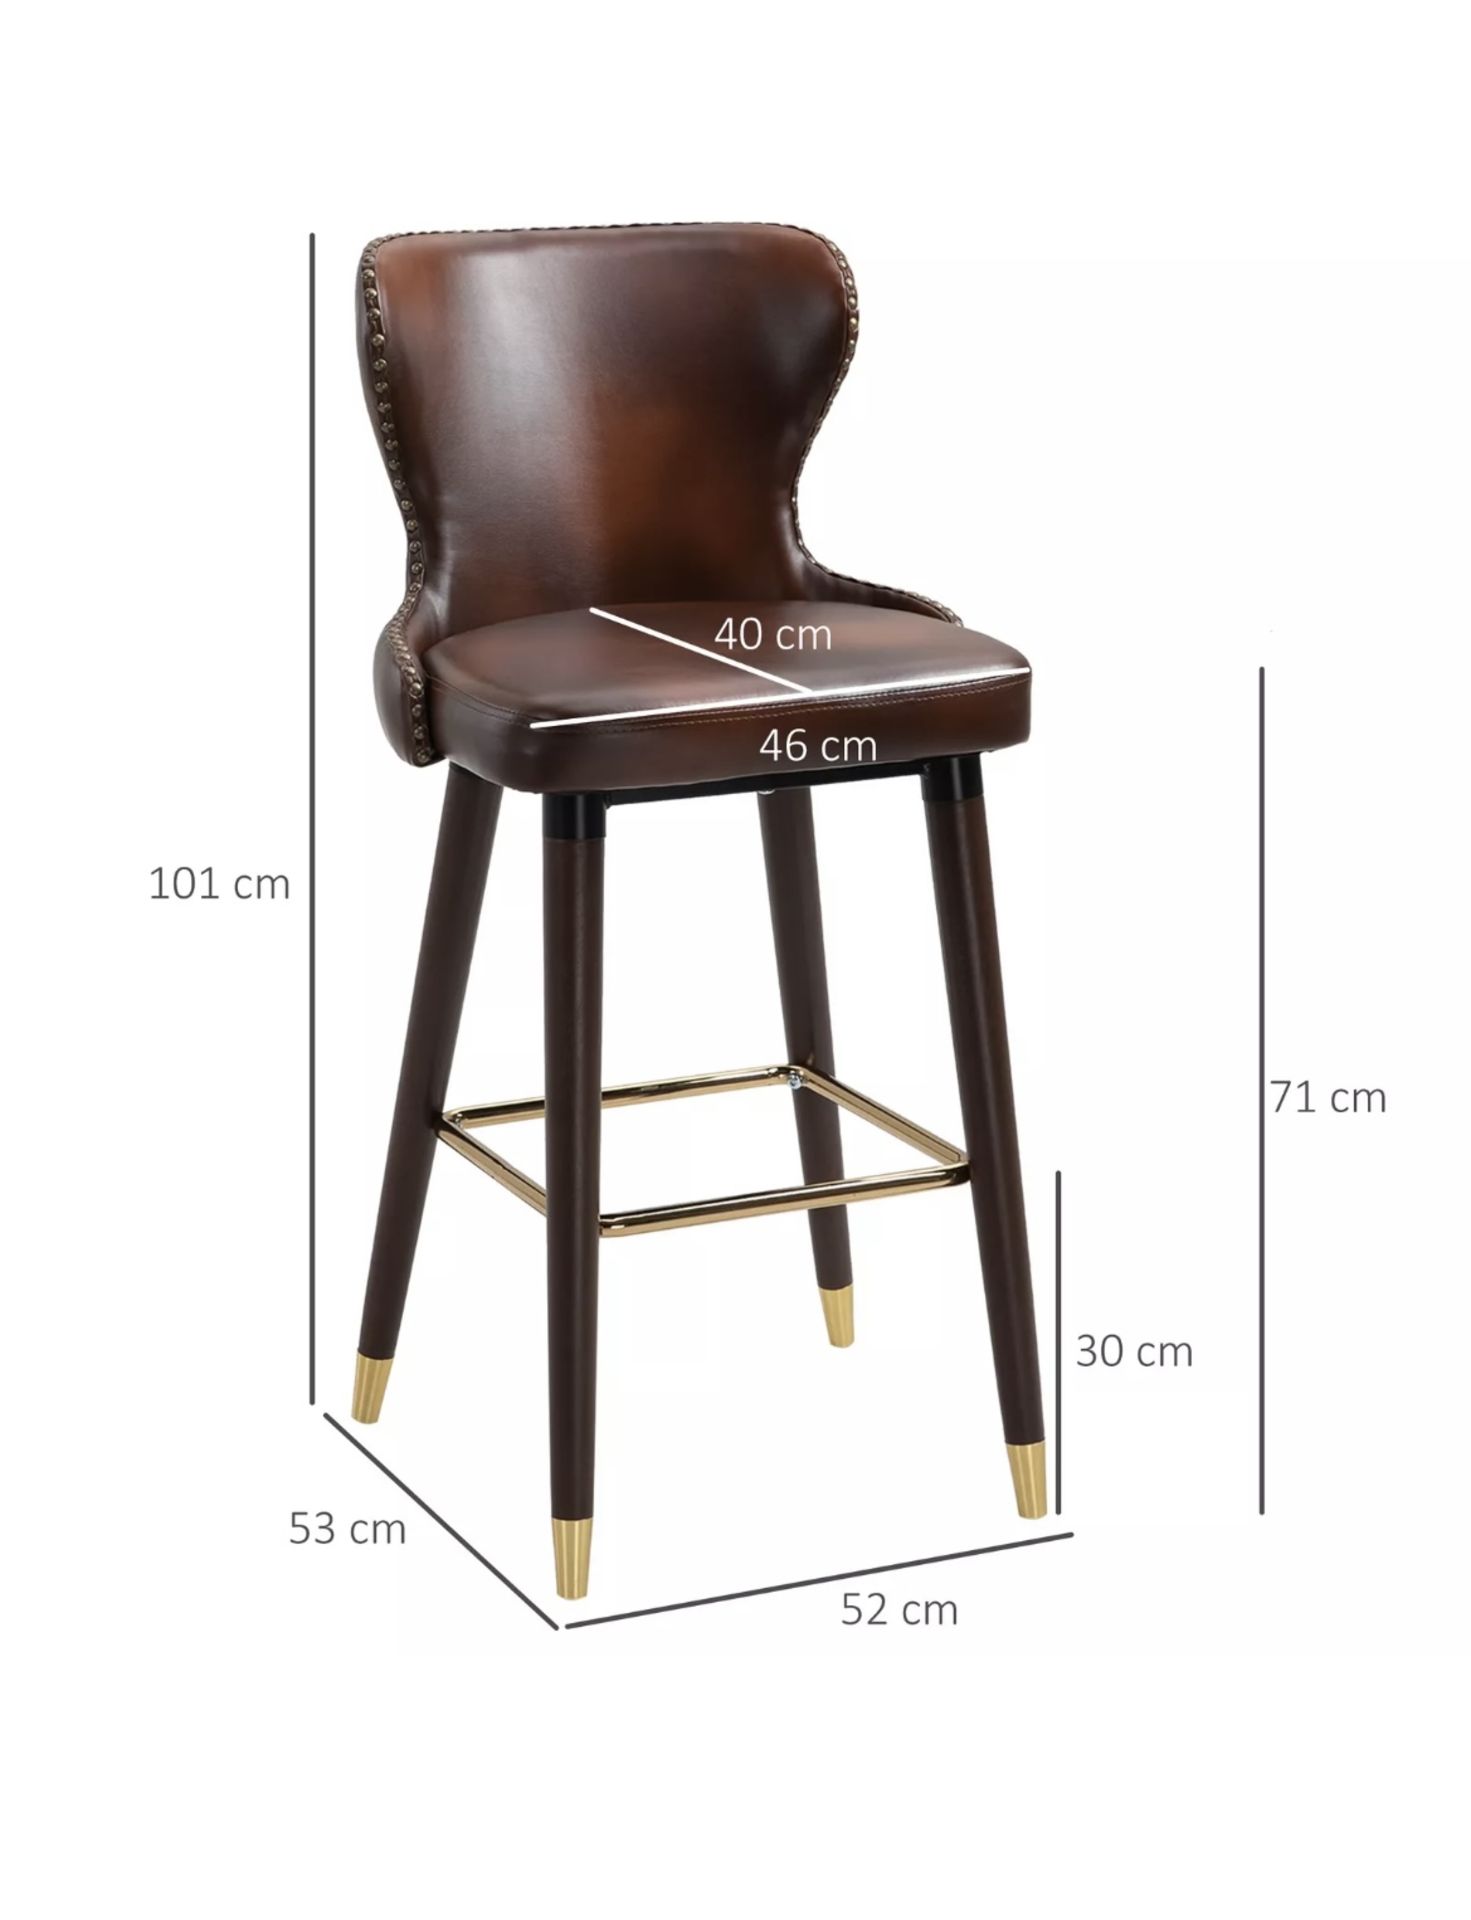 LUXURY SOLID BAR STOOLS SET OF 2 WITH BACK, PU LEATHER UPHOLSTERY, BROWN - Image 2 of 2